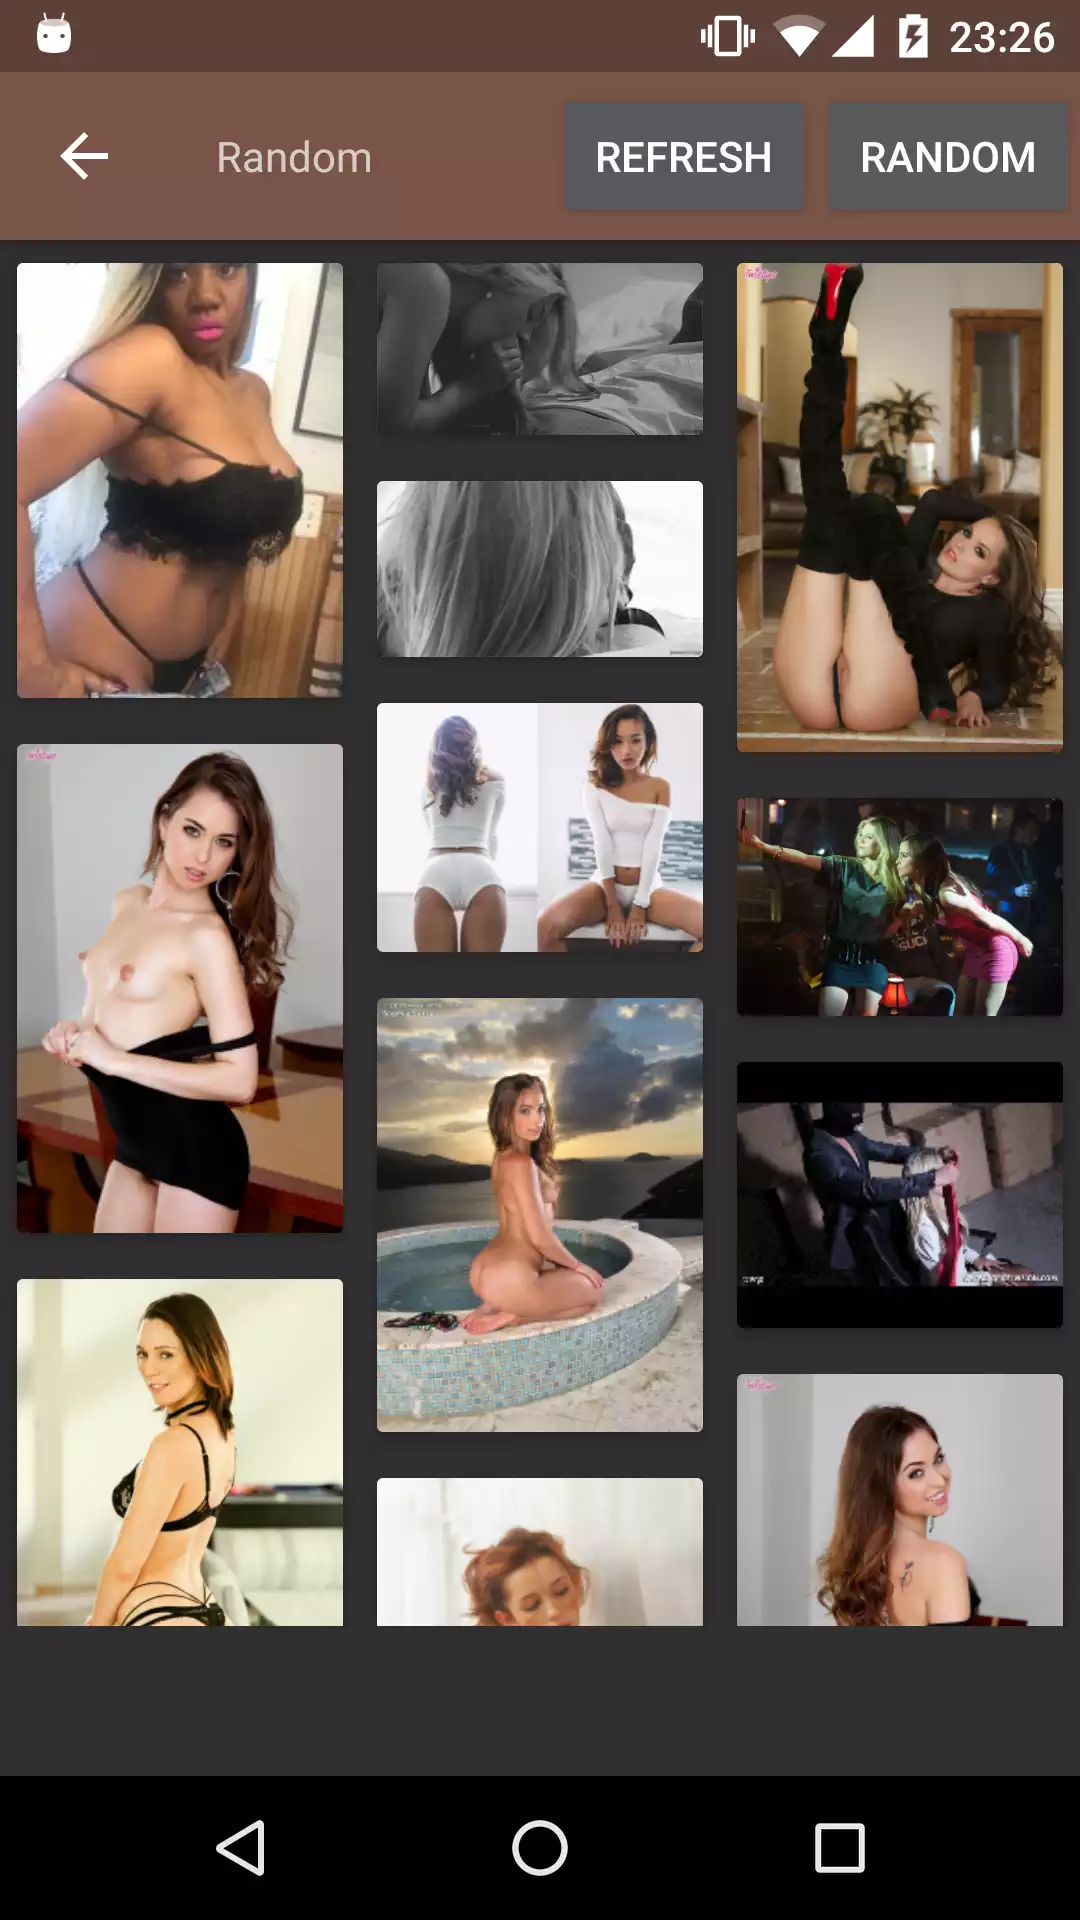 Hot pornstar pics android,pic,hot,picture,apk,topless,photos,porn,kristinf,erotic,sexy,wallpapers,galleries,best,pics,sissy,app,pornstars,for,hentai,cuckhold,apps